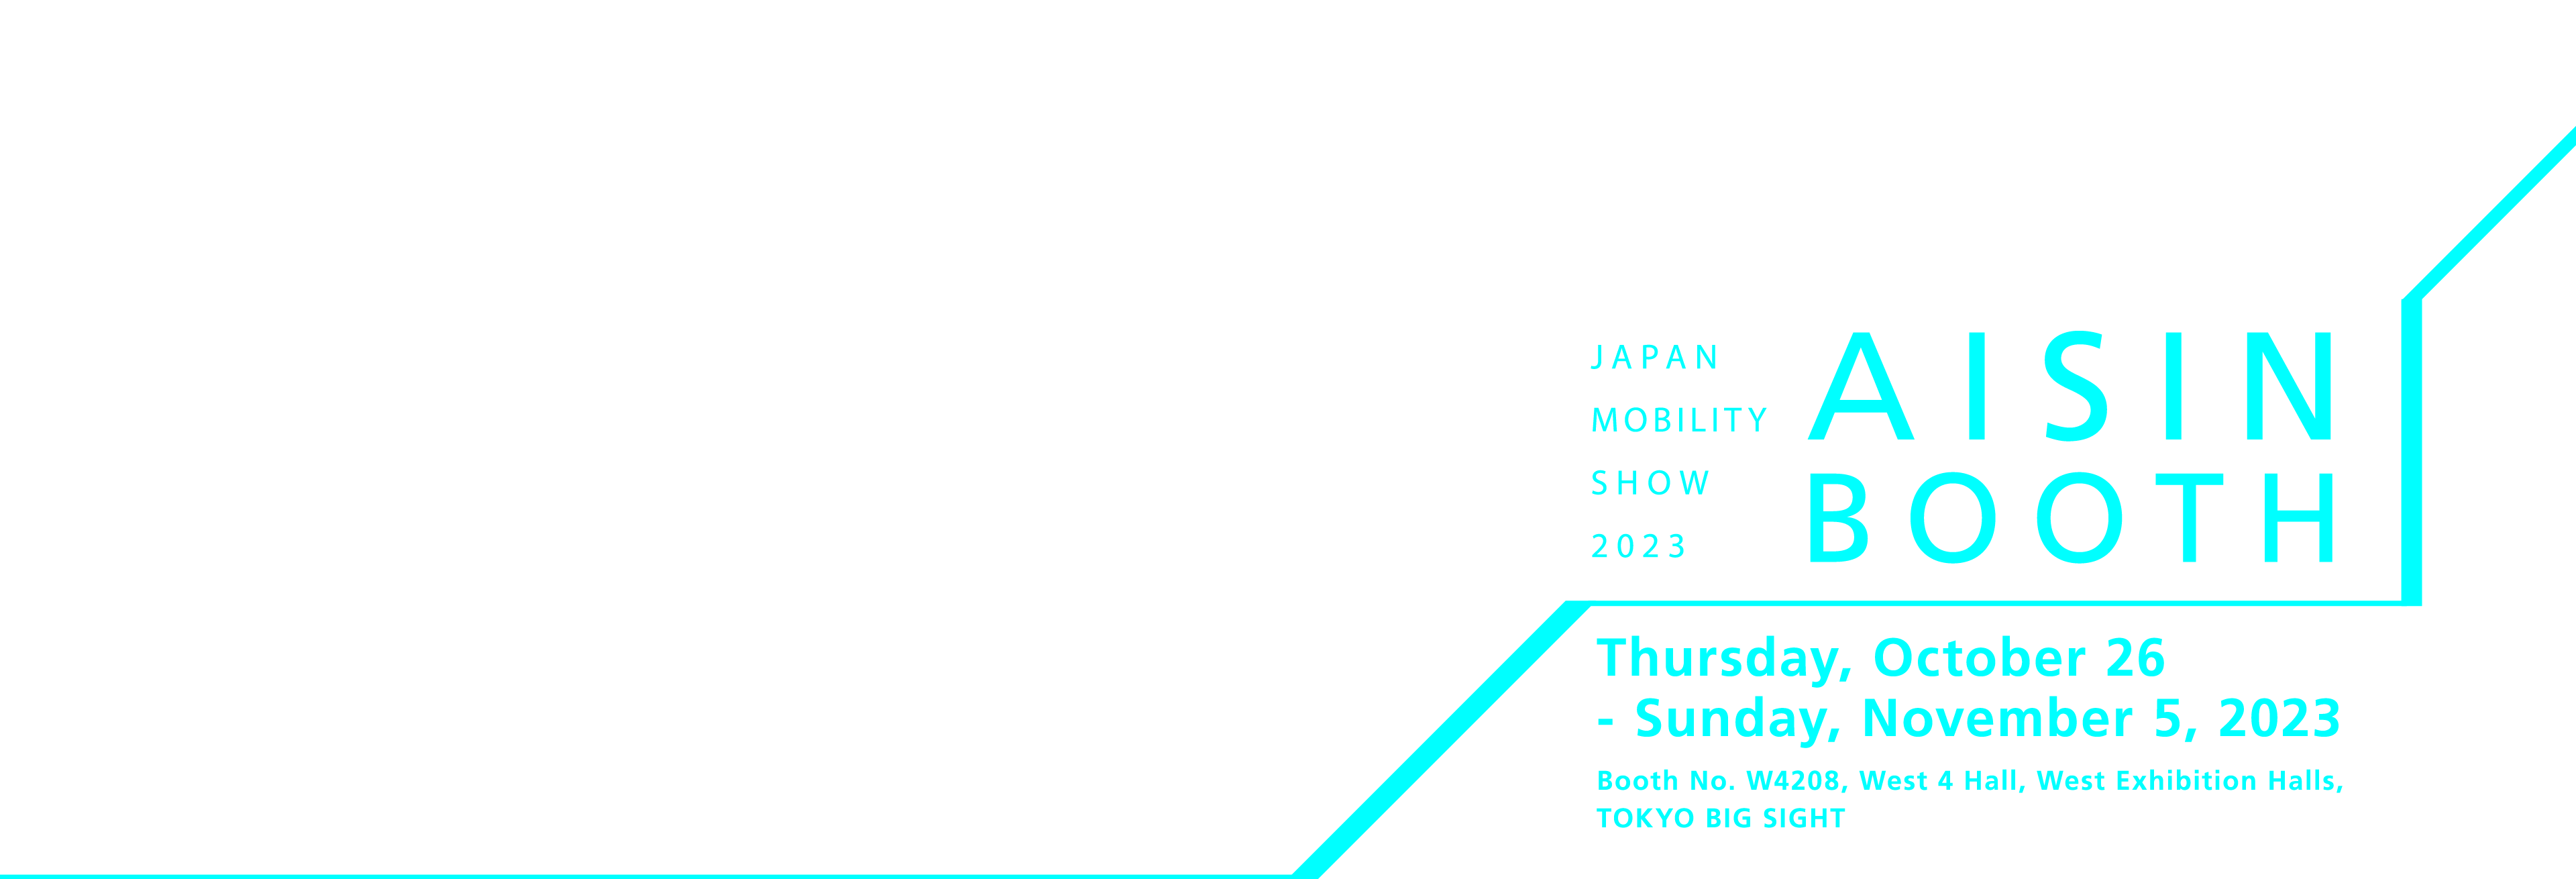 JAPAN MOBILITY SHOW 2023 AISIN BOOTH Thursday, October 26- Sunday, November 5, 2023 Booth No. W4208, West 4 Hall, West Exhibition Halls,TOKYO BIG SIGHT